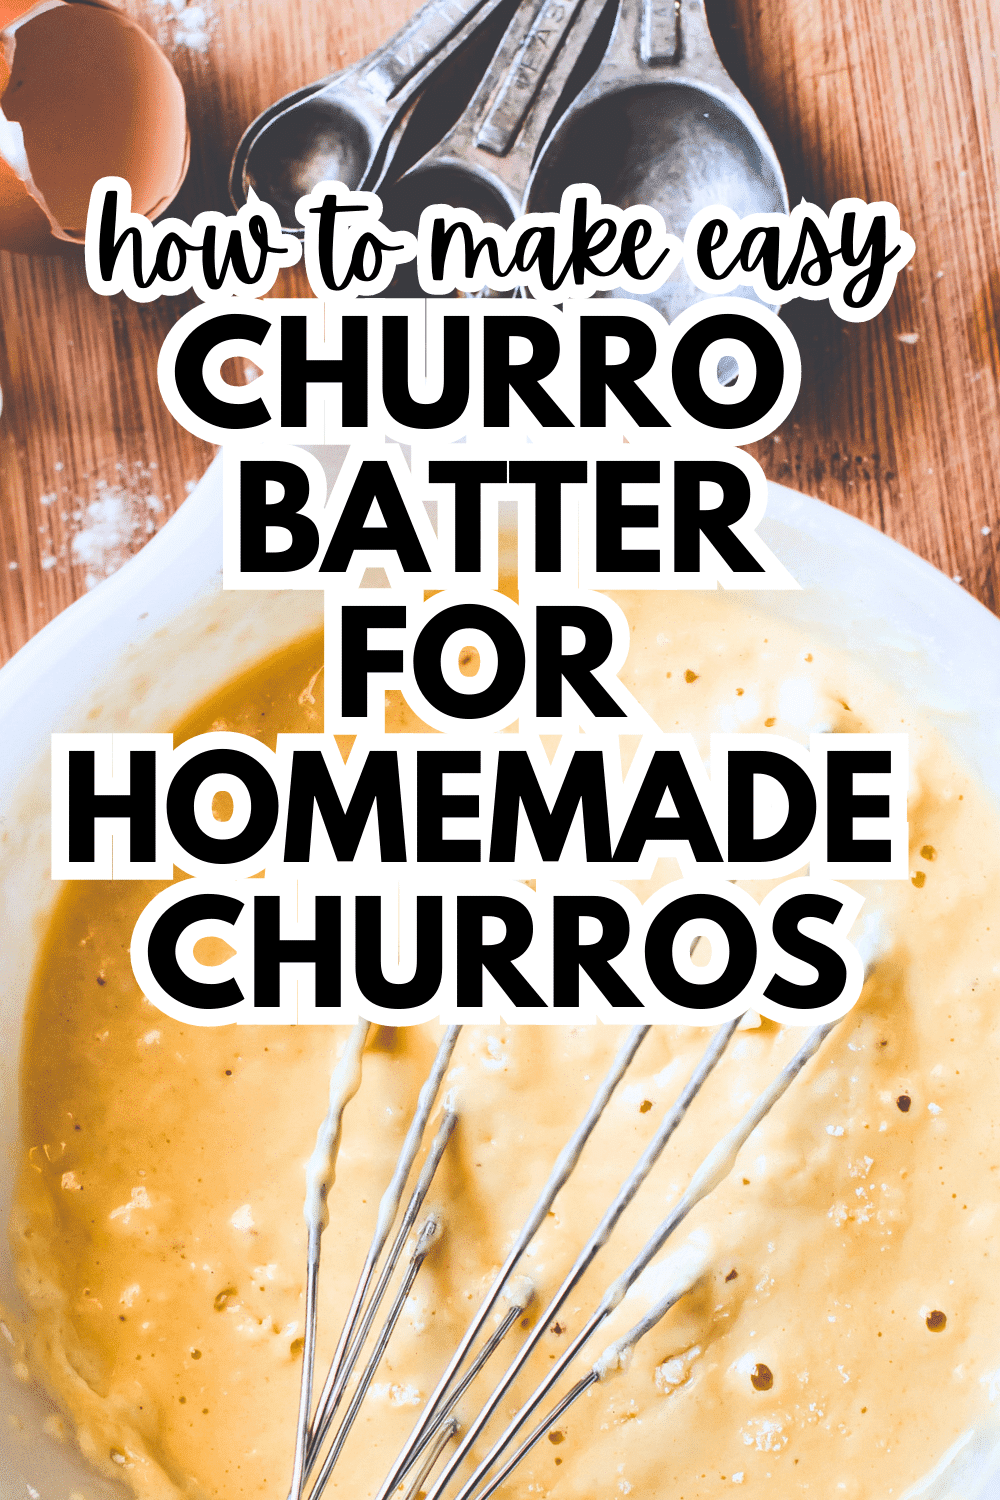 PERFECT CHURRO BATTER RECIPE image of churros batter being made with whisk